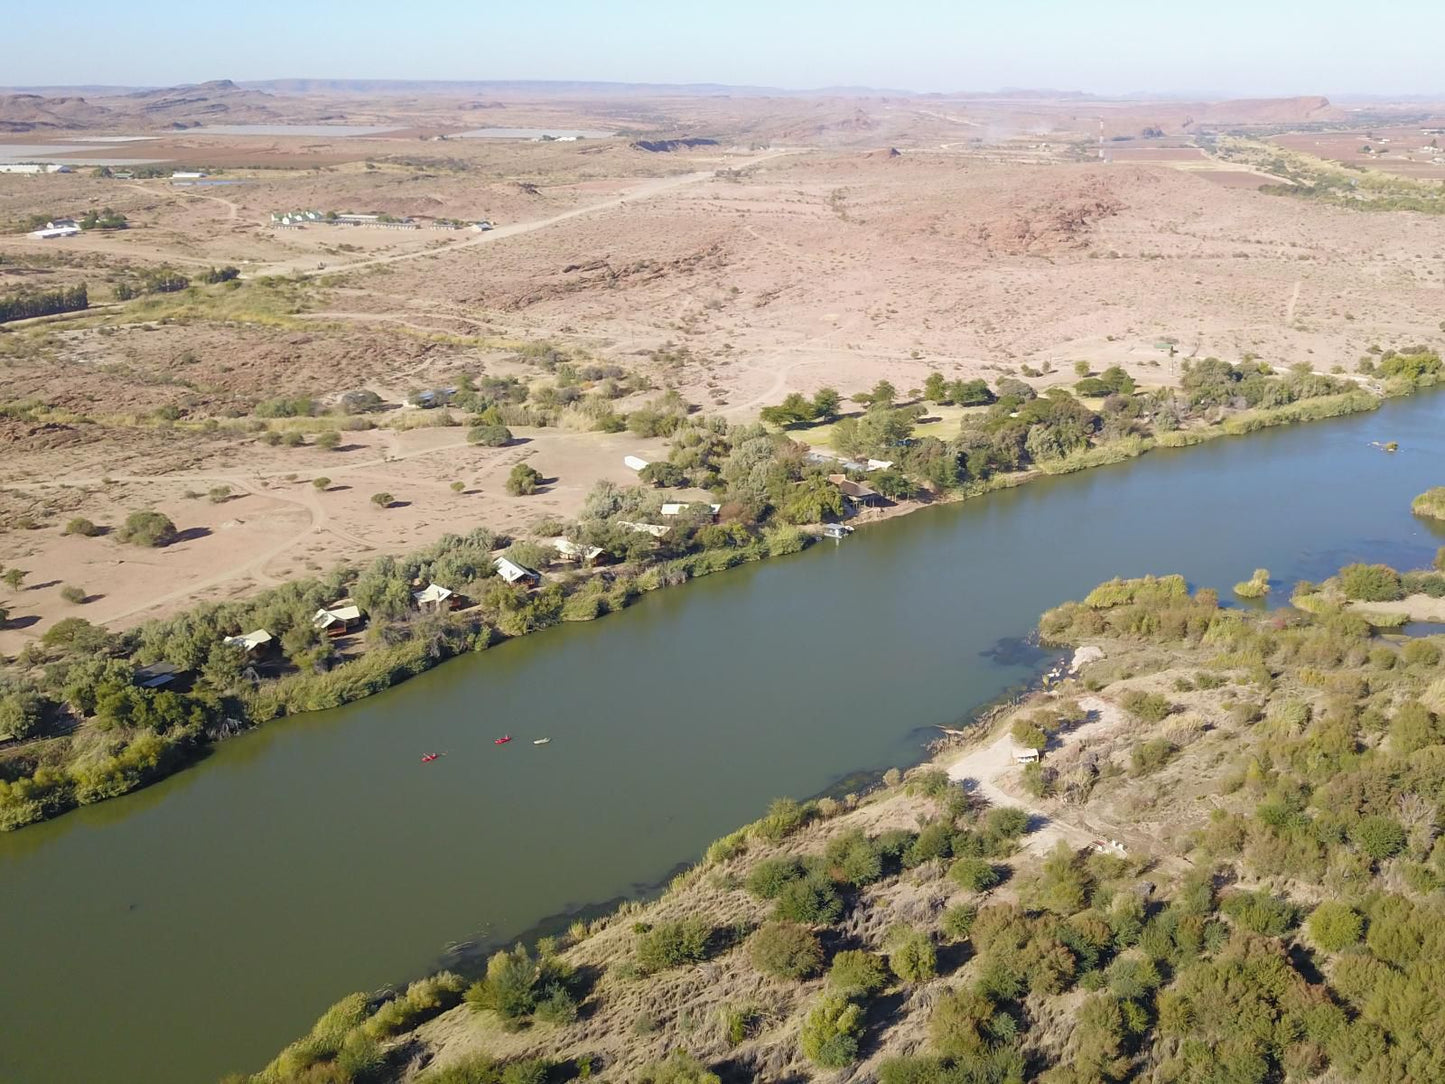 Khamkirri Augrabies Northern Cape South Africa River, Nature, Waters, Aerial Photography